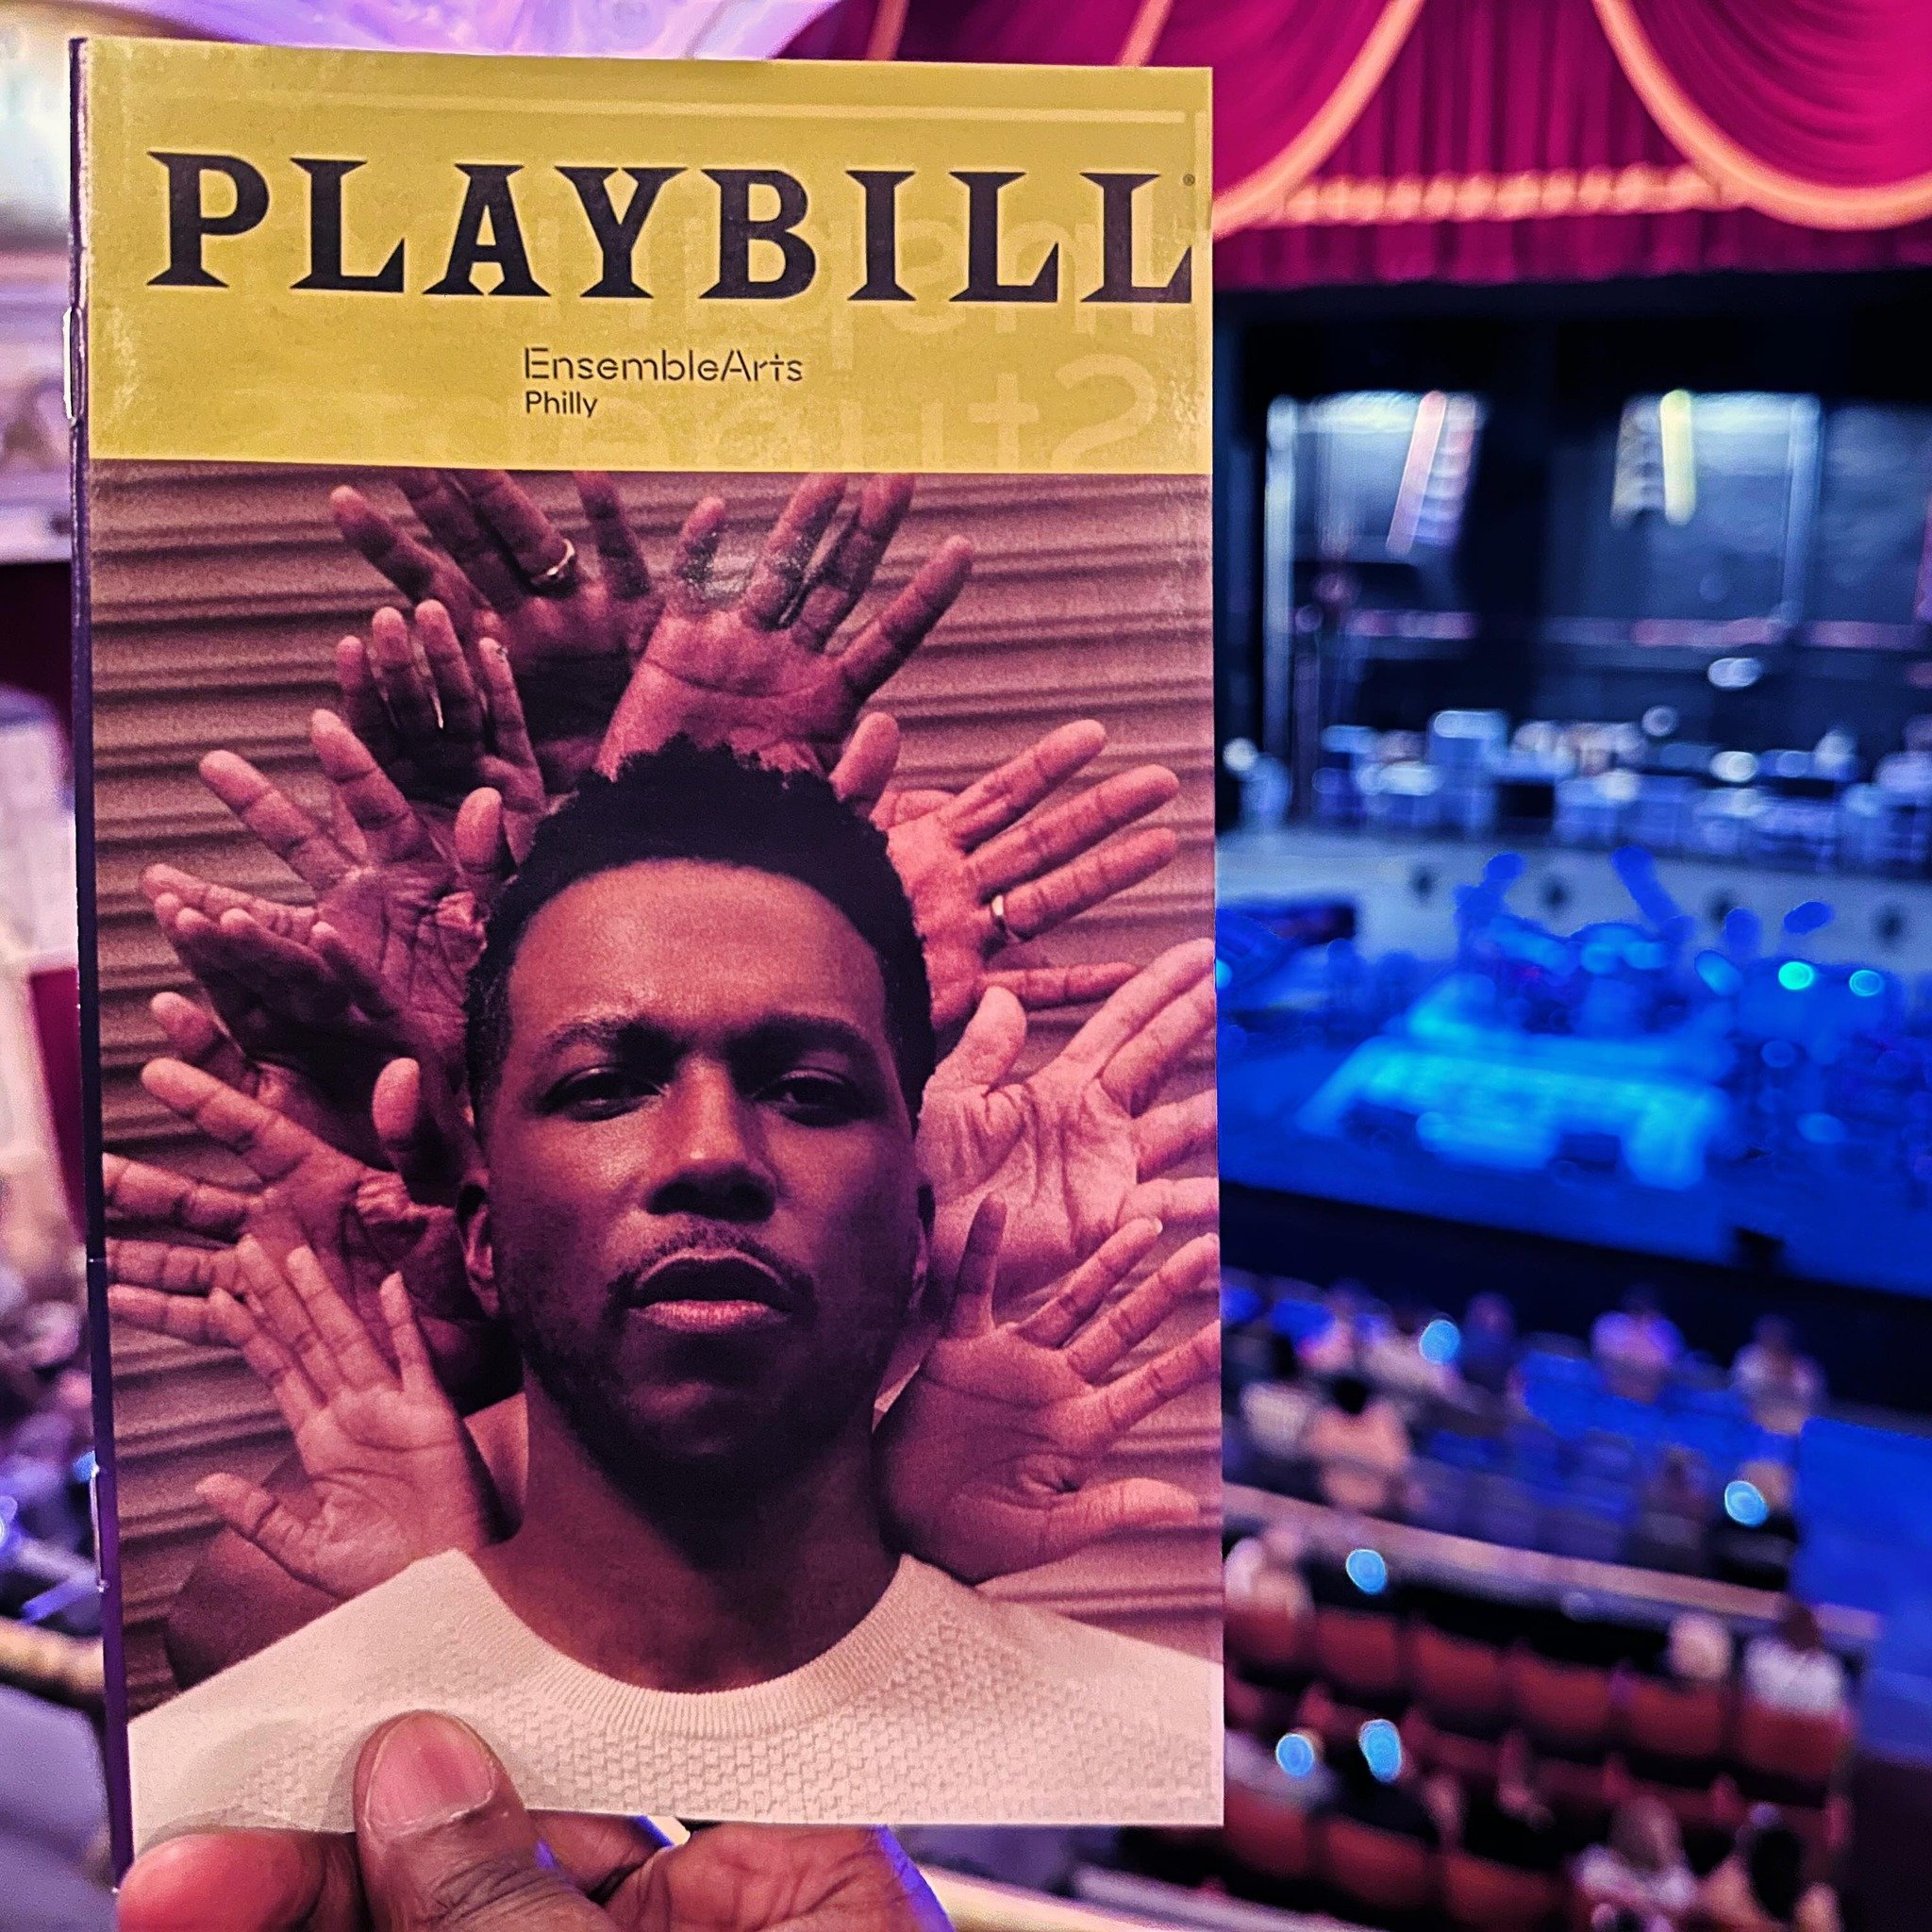 Tonight&rsquo;s Experience&hellip;We out here in #TheRoomWhereItHappens with @leslieodomjr #HometownHero #MrBurrSir @ensembleartsphilly #showup4phillytheatre